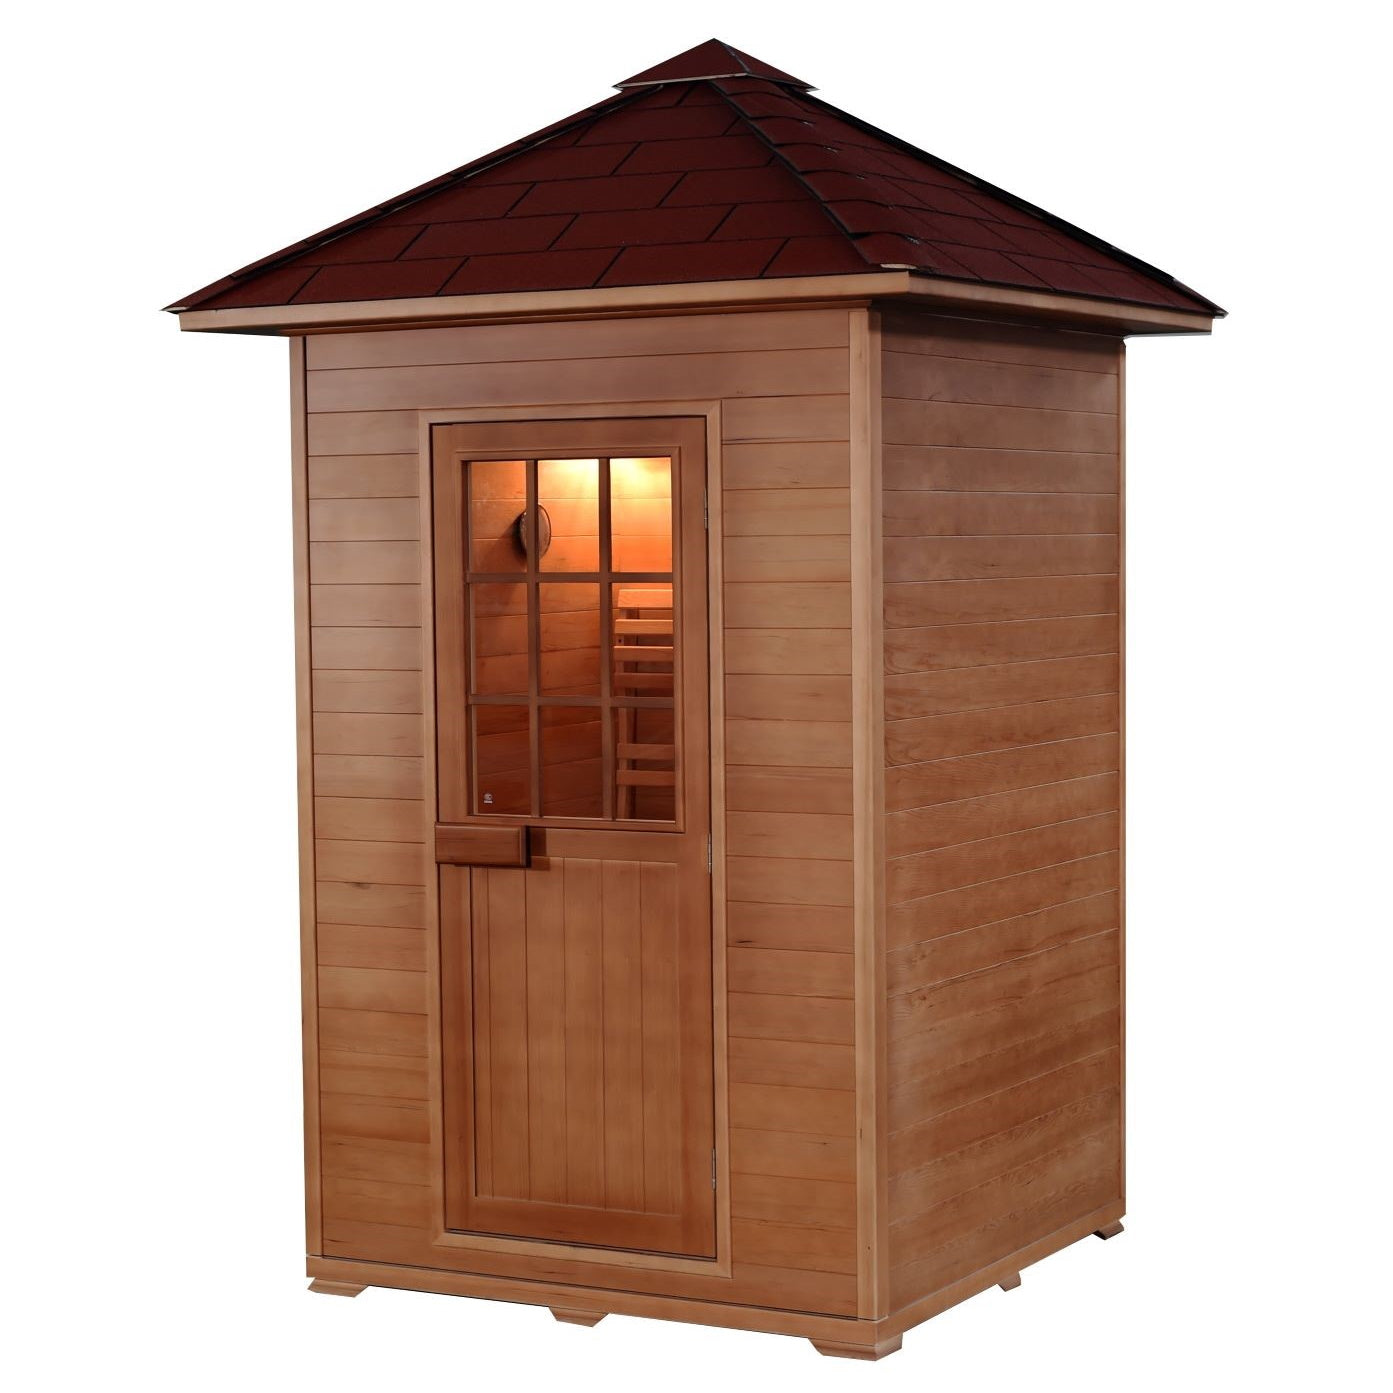 SunRay Eagle 2-Person Outdoor Traditional Sauna  - Canadian hemlock wood with shingled roof- Closed door - HL200D1 Eagle - Isometric view